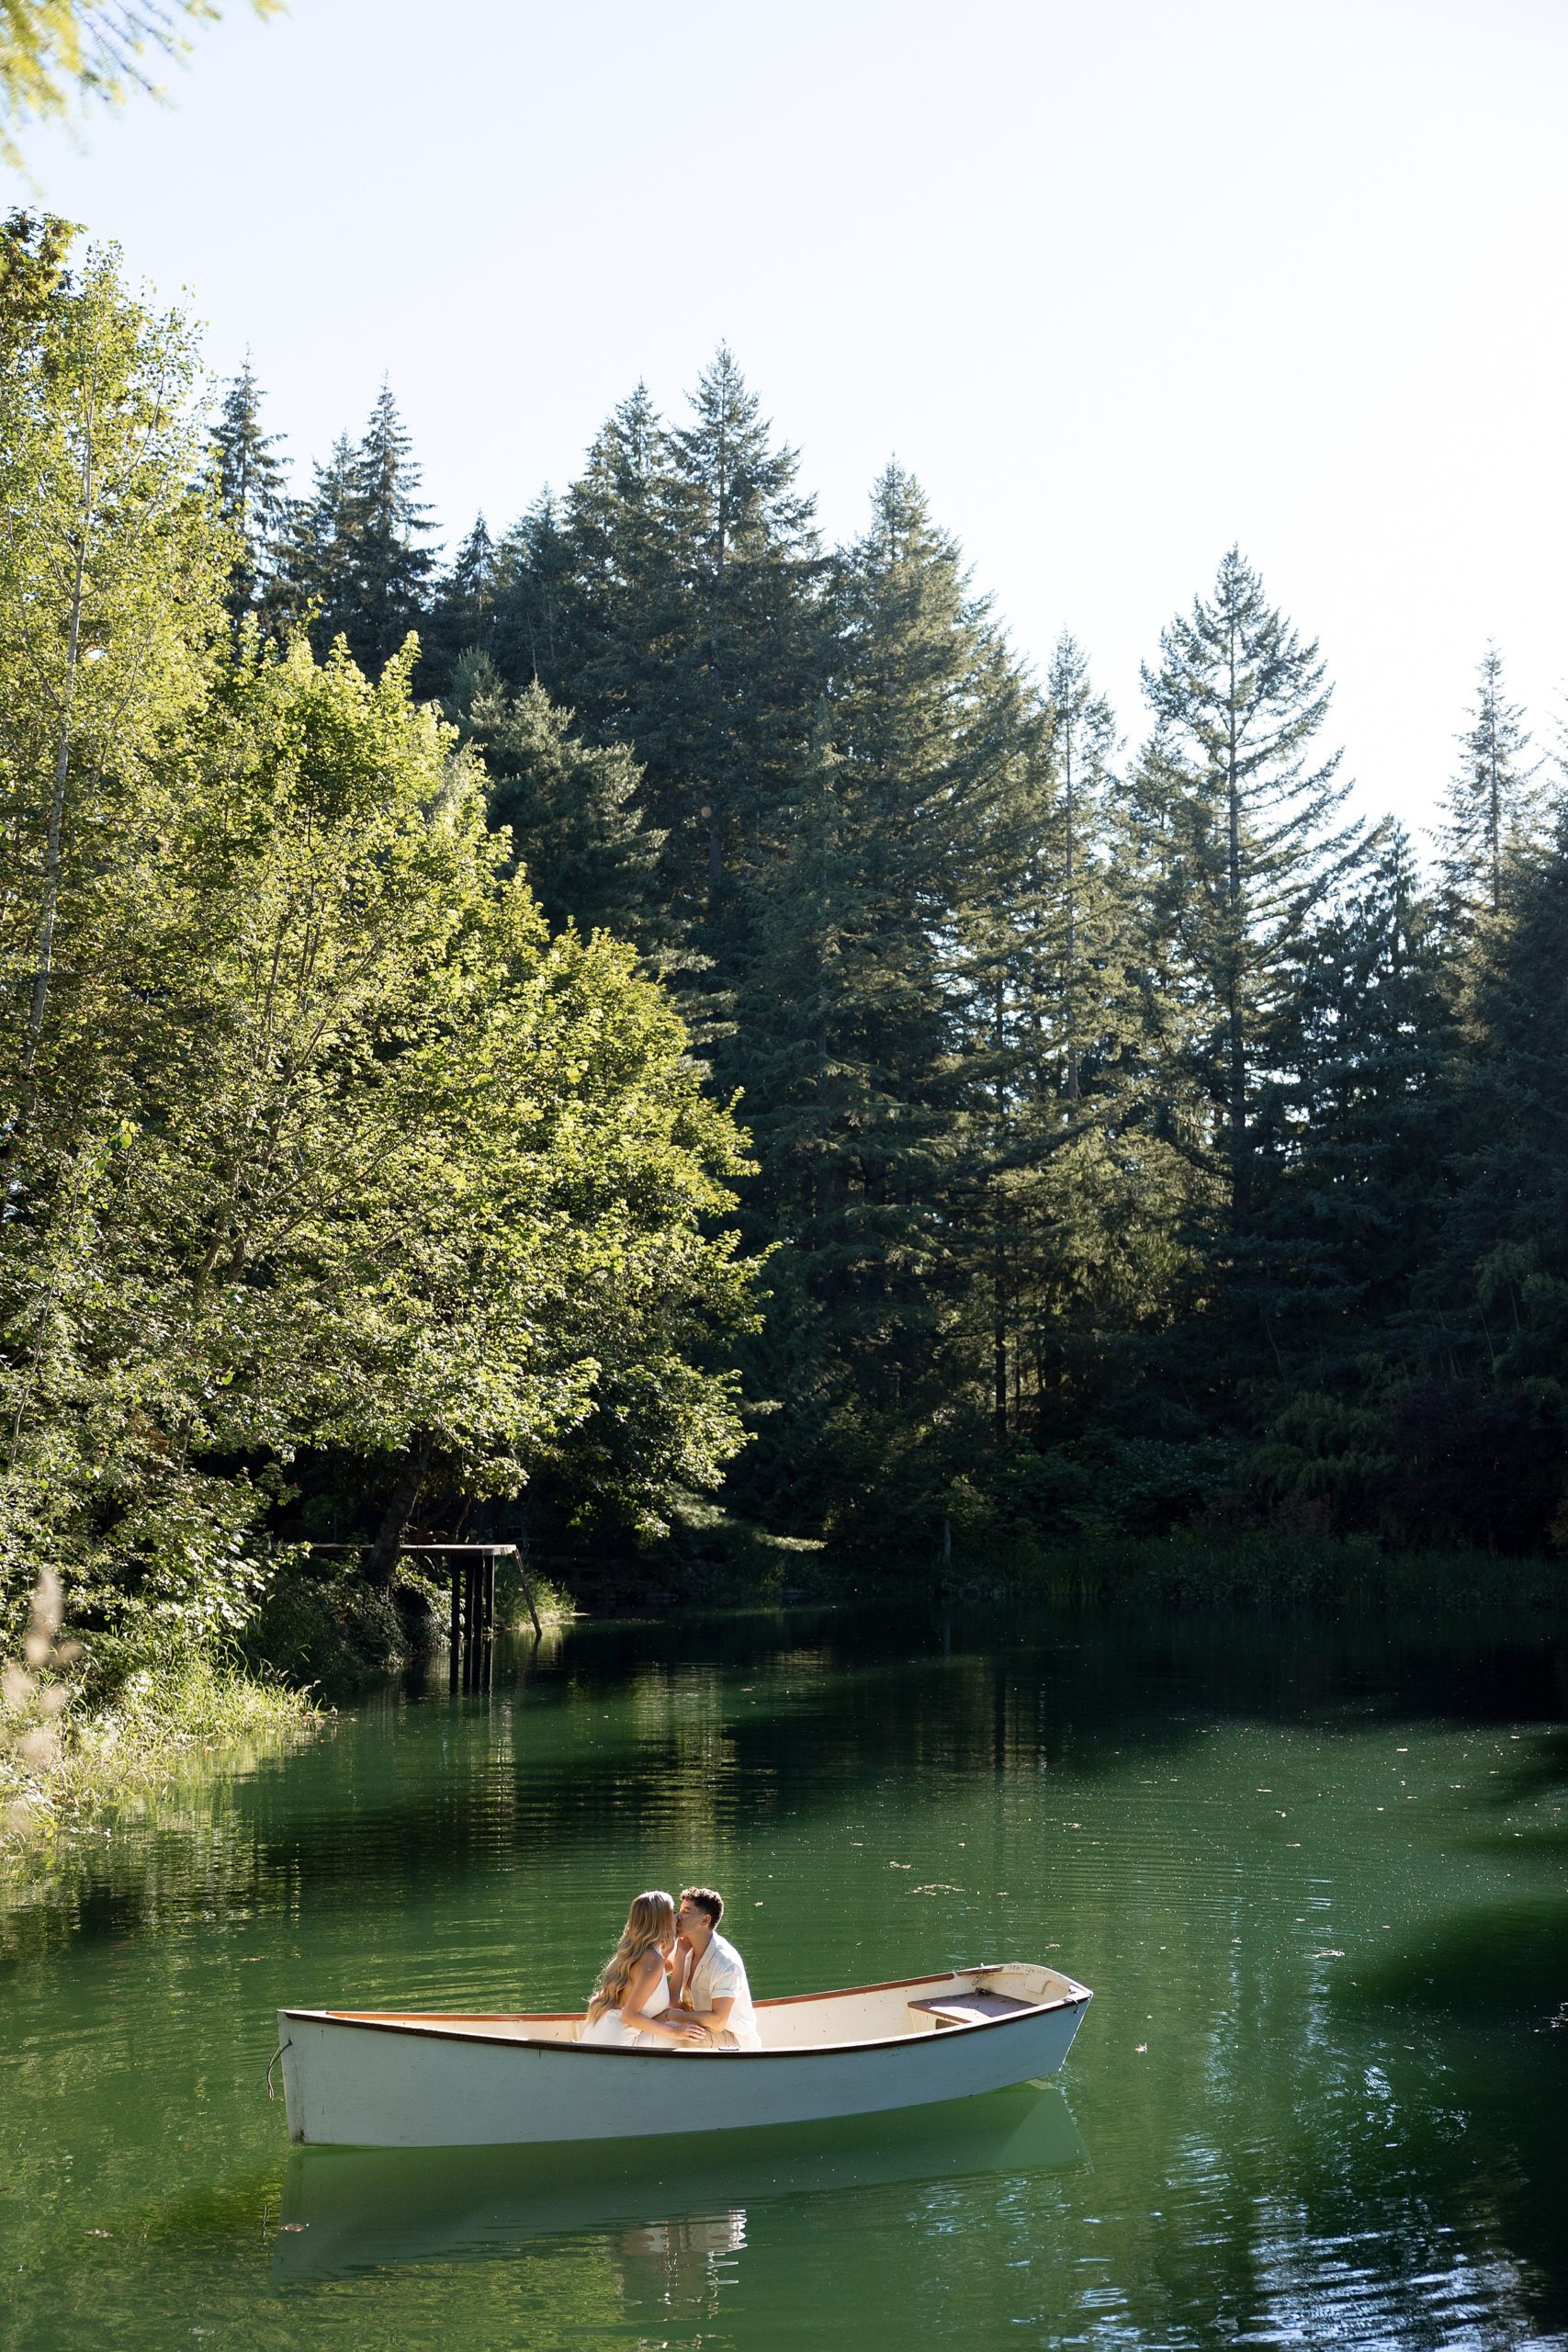 lake engagement photos in scenic greenery trees and a white small row boat